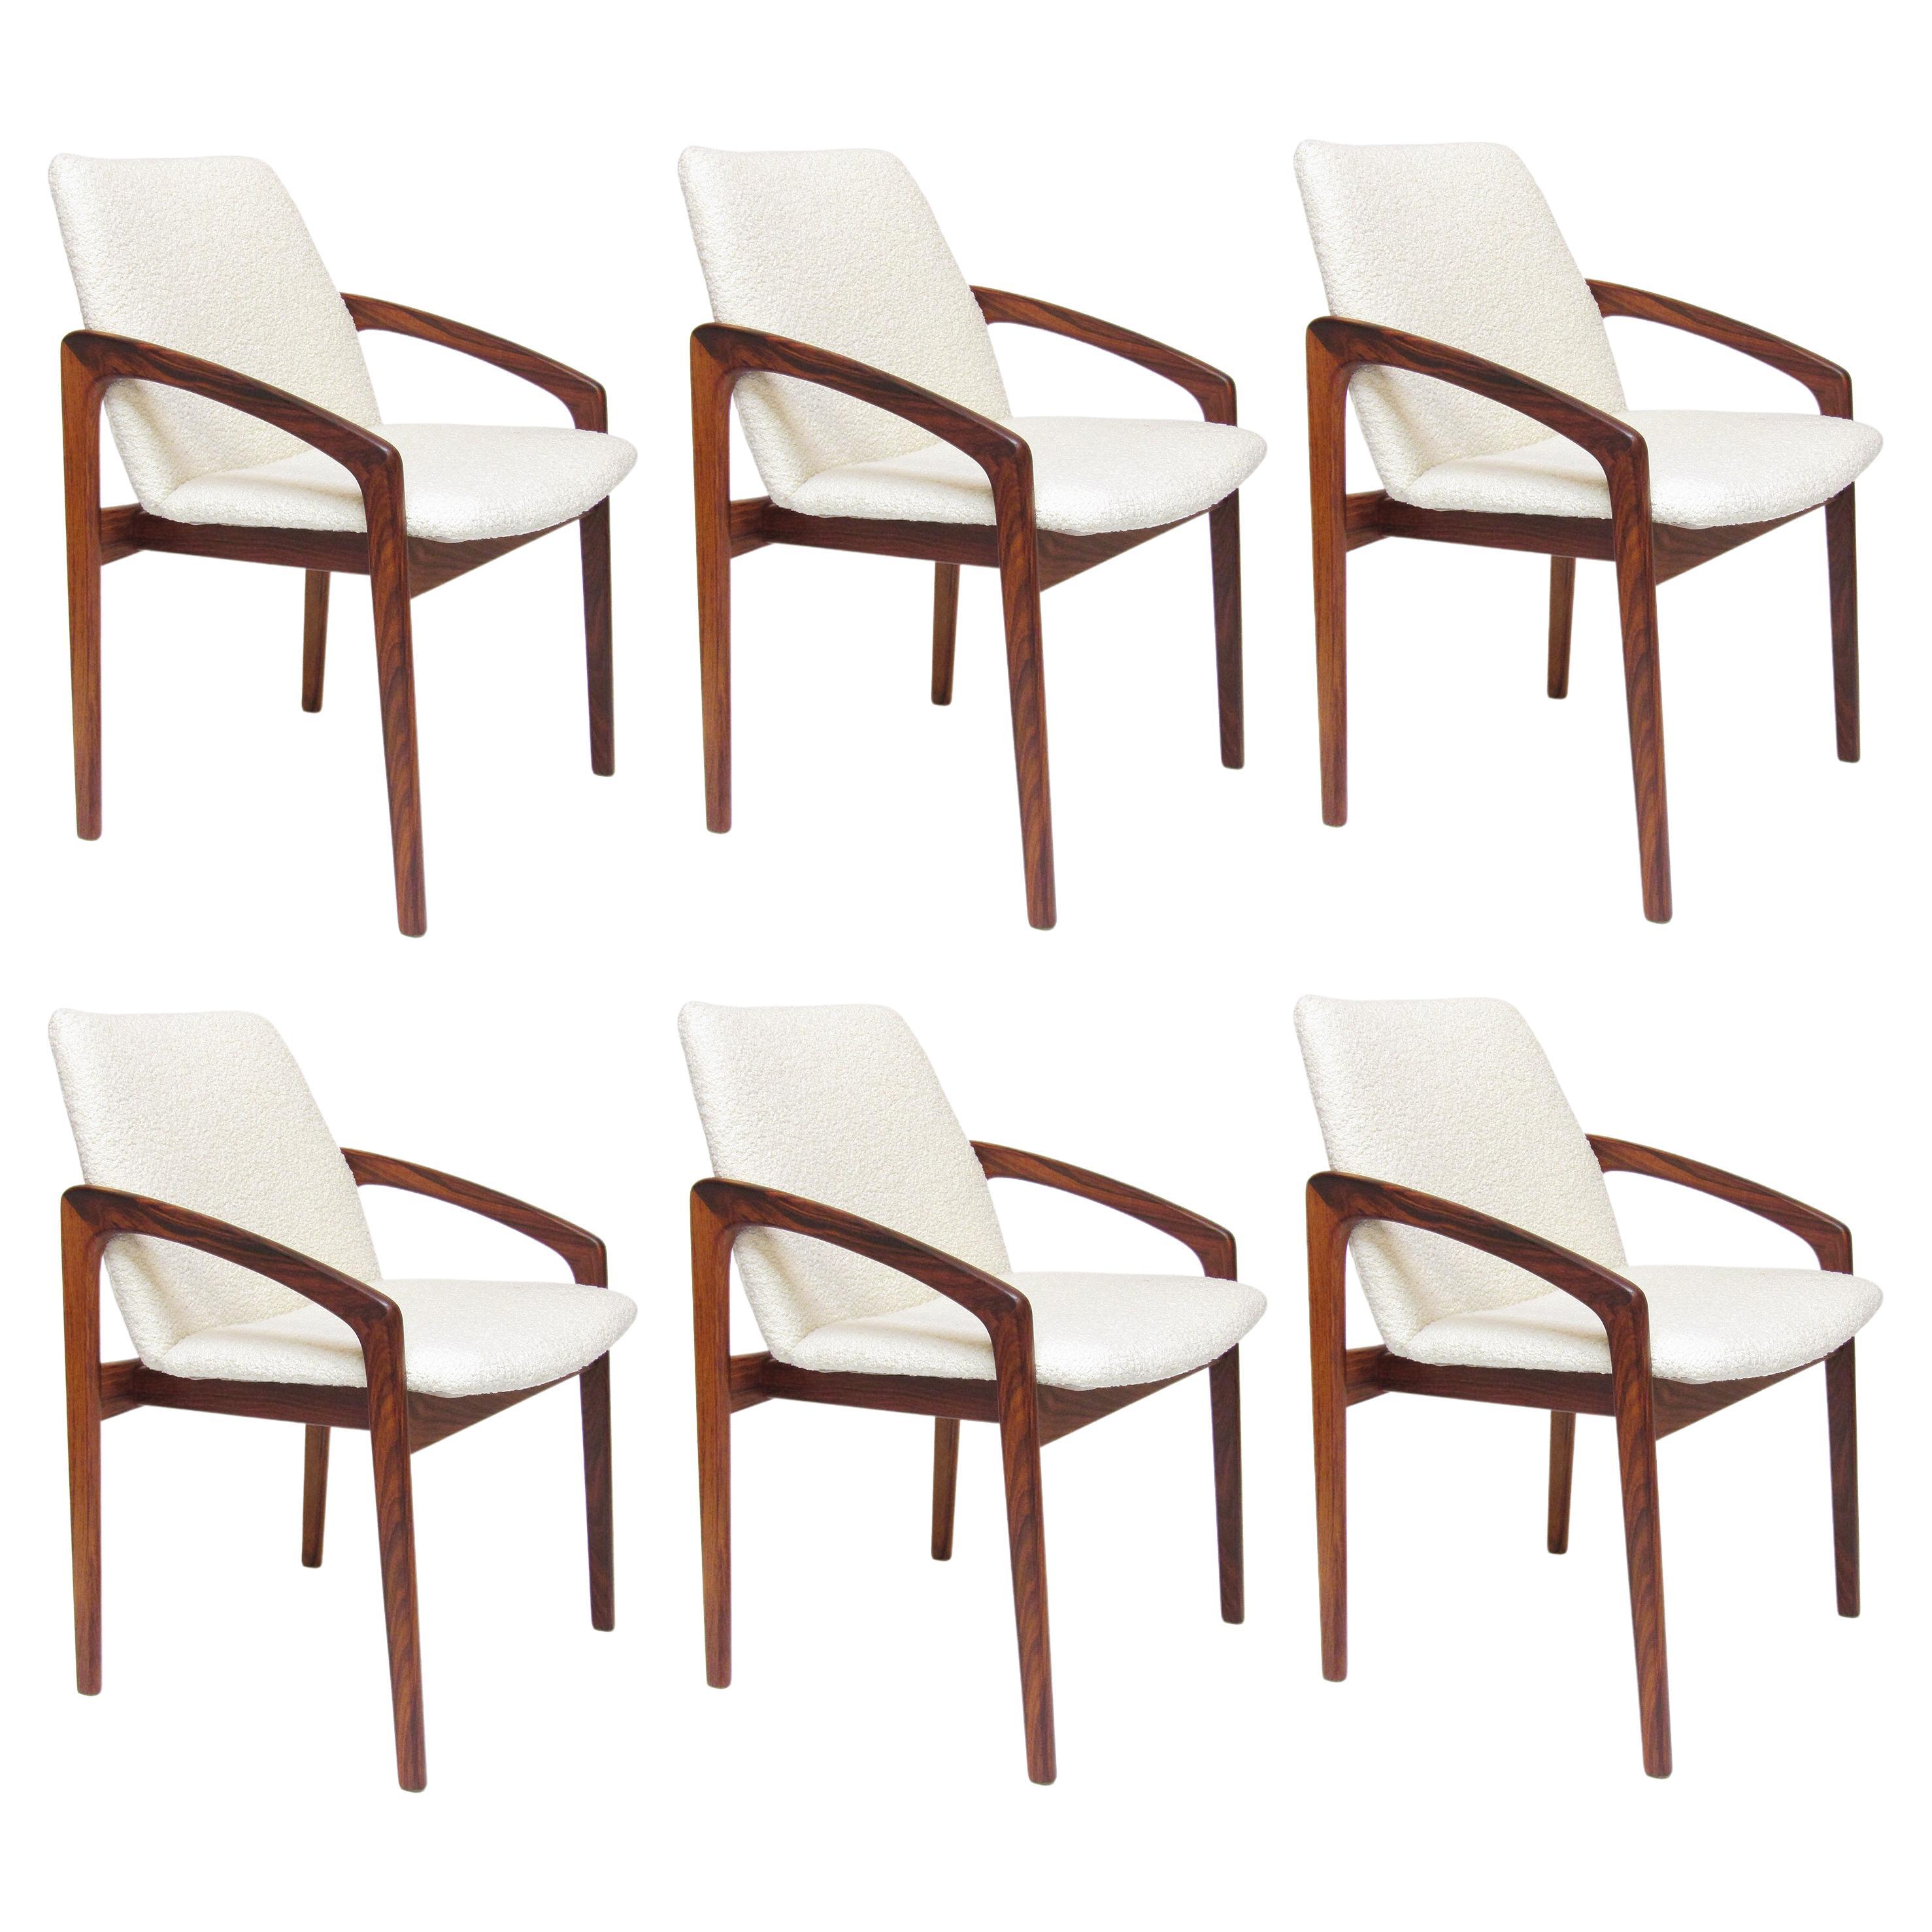 6 Danish Paper Knife Chairs in Rosewood & Ivory Bouclé by Henning Kjaernulf 